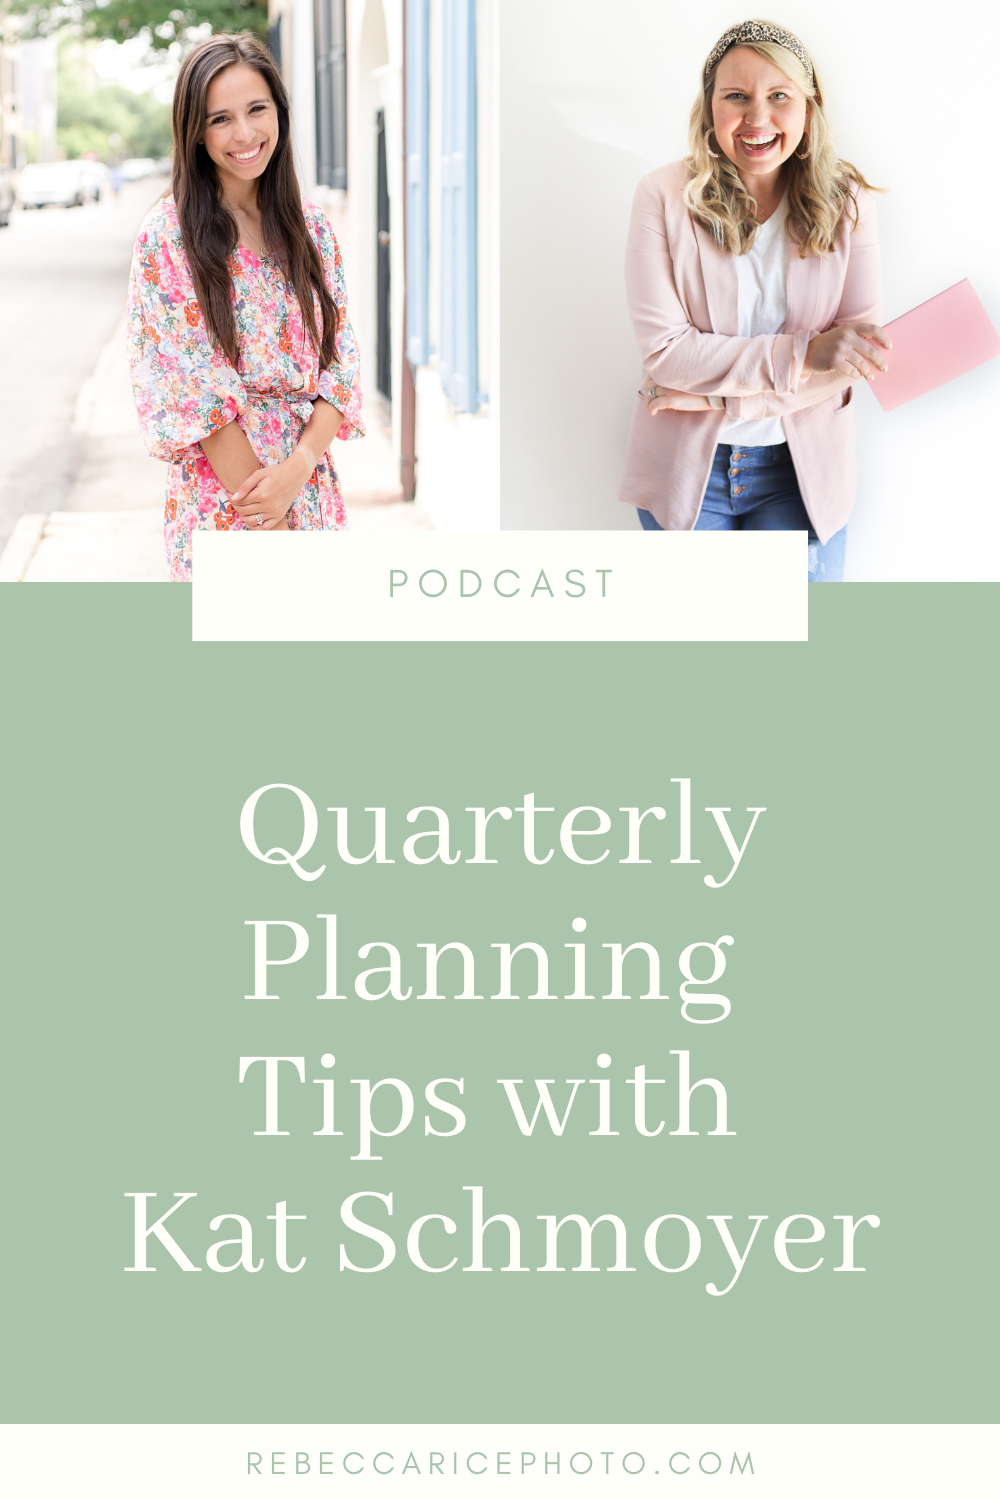 Quarterly Planning Tips with Kat Schmoyer